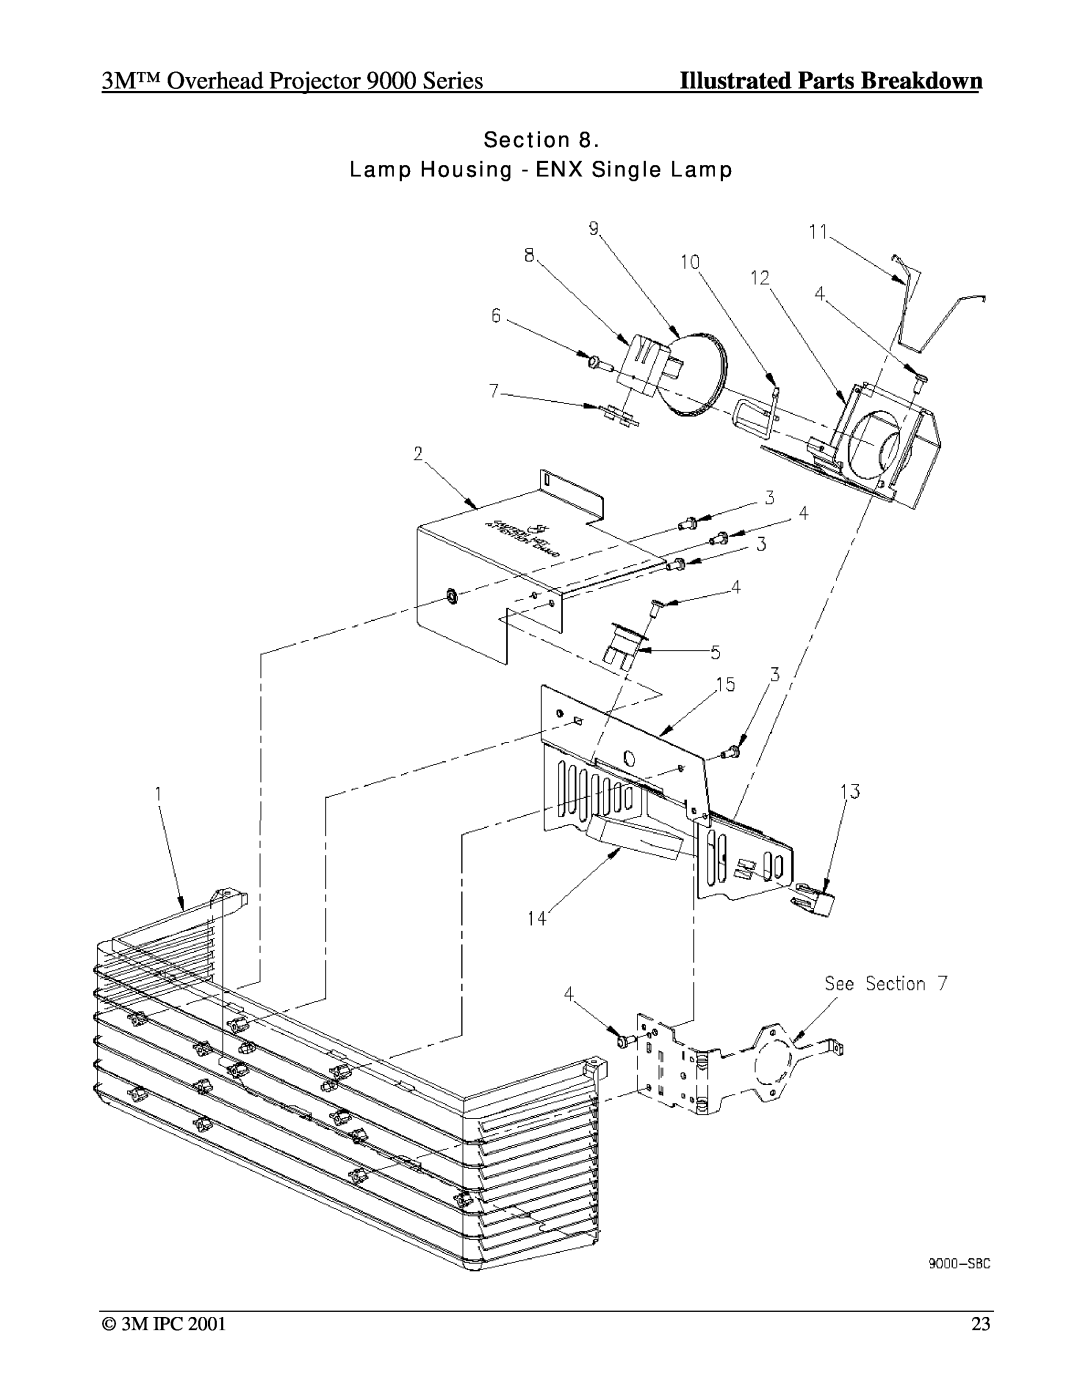 Xerox 9075 Section Lamp Housing - ENX Single Lamp, 3M Overhead Projector 9000 Series, Illustrated Parts Breakdown, 3M IPC 